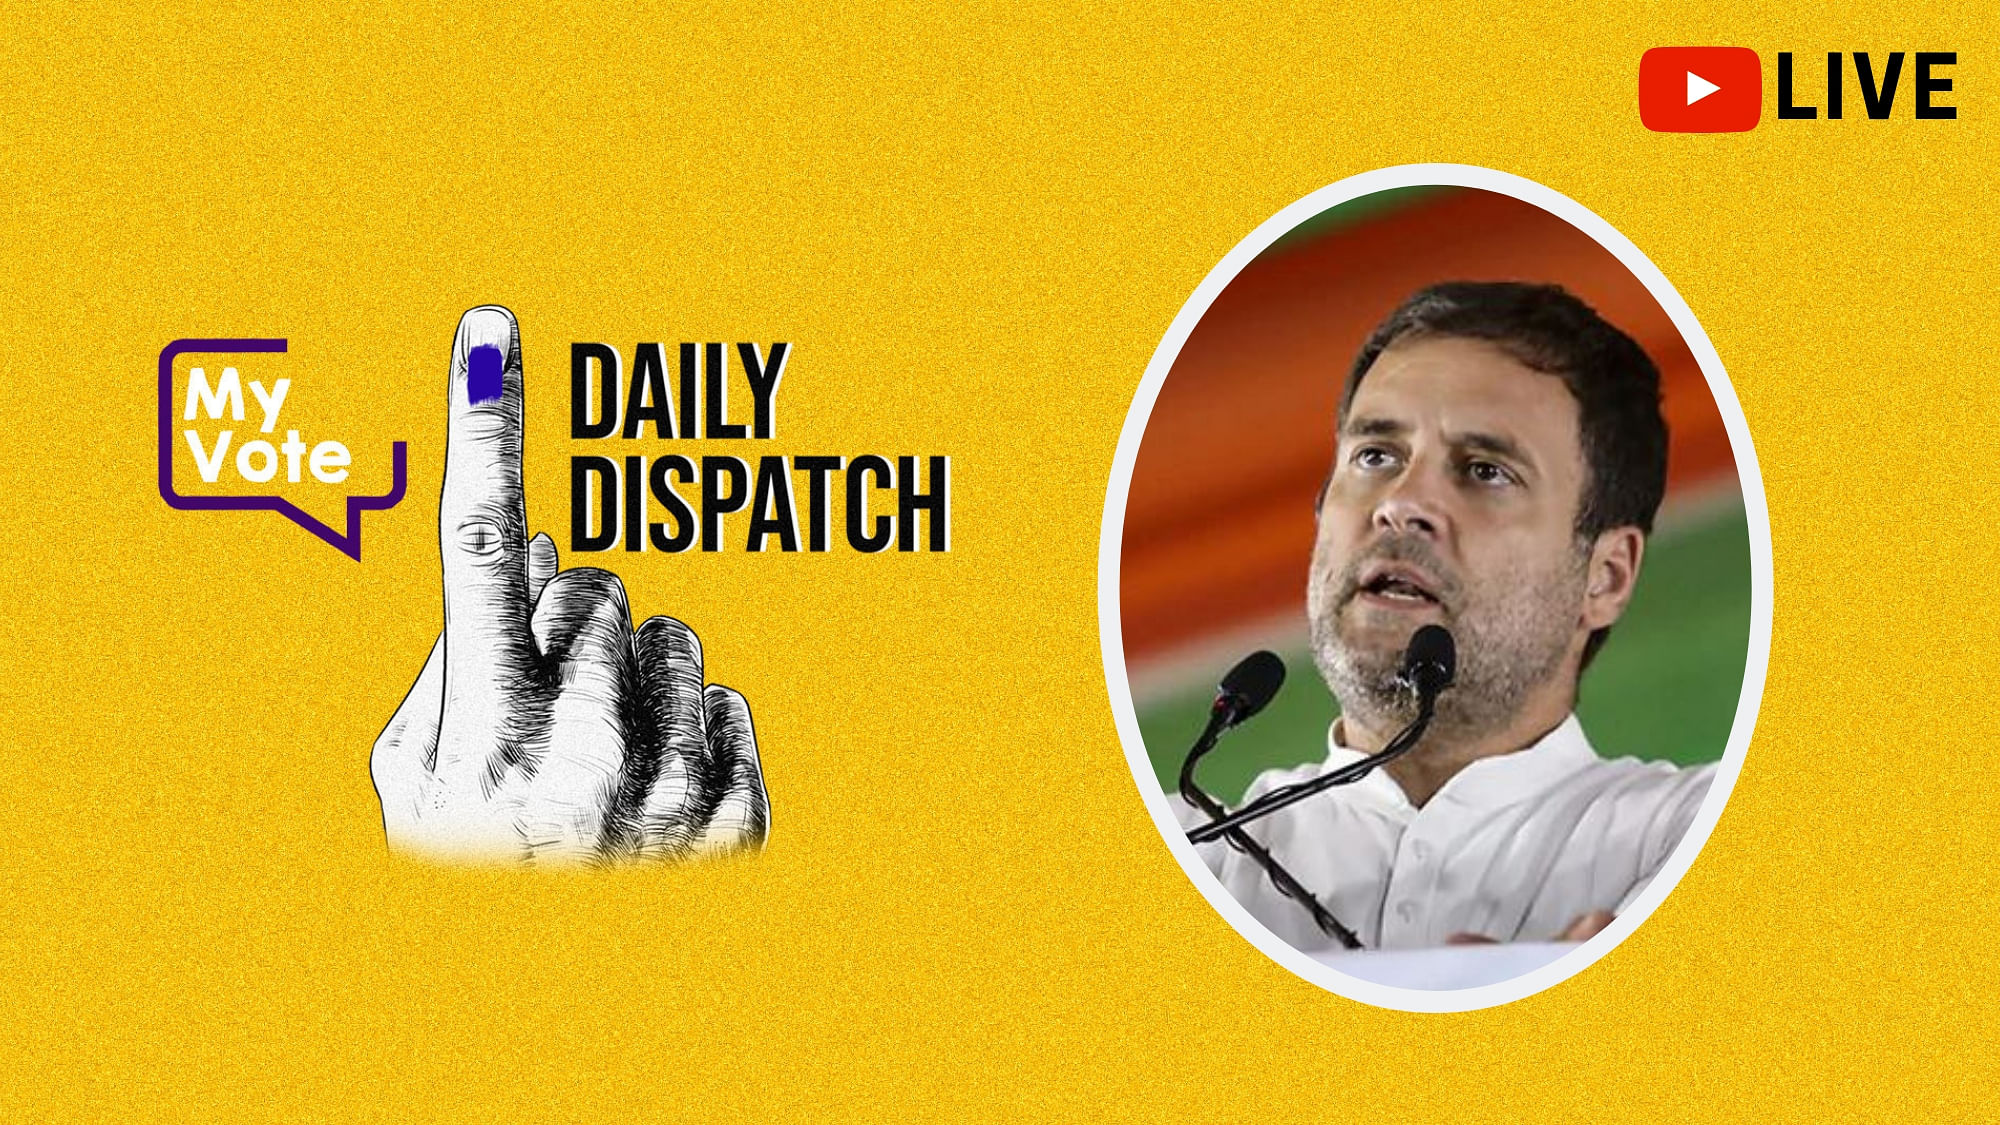 Today’s episode of Daily Dispatch.